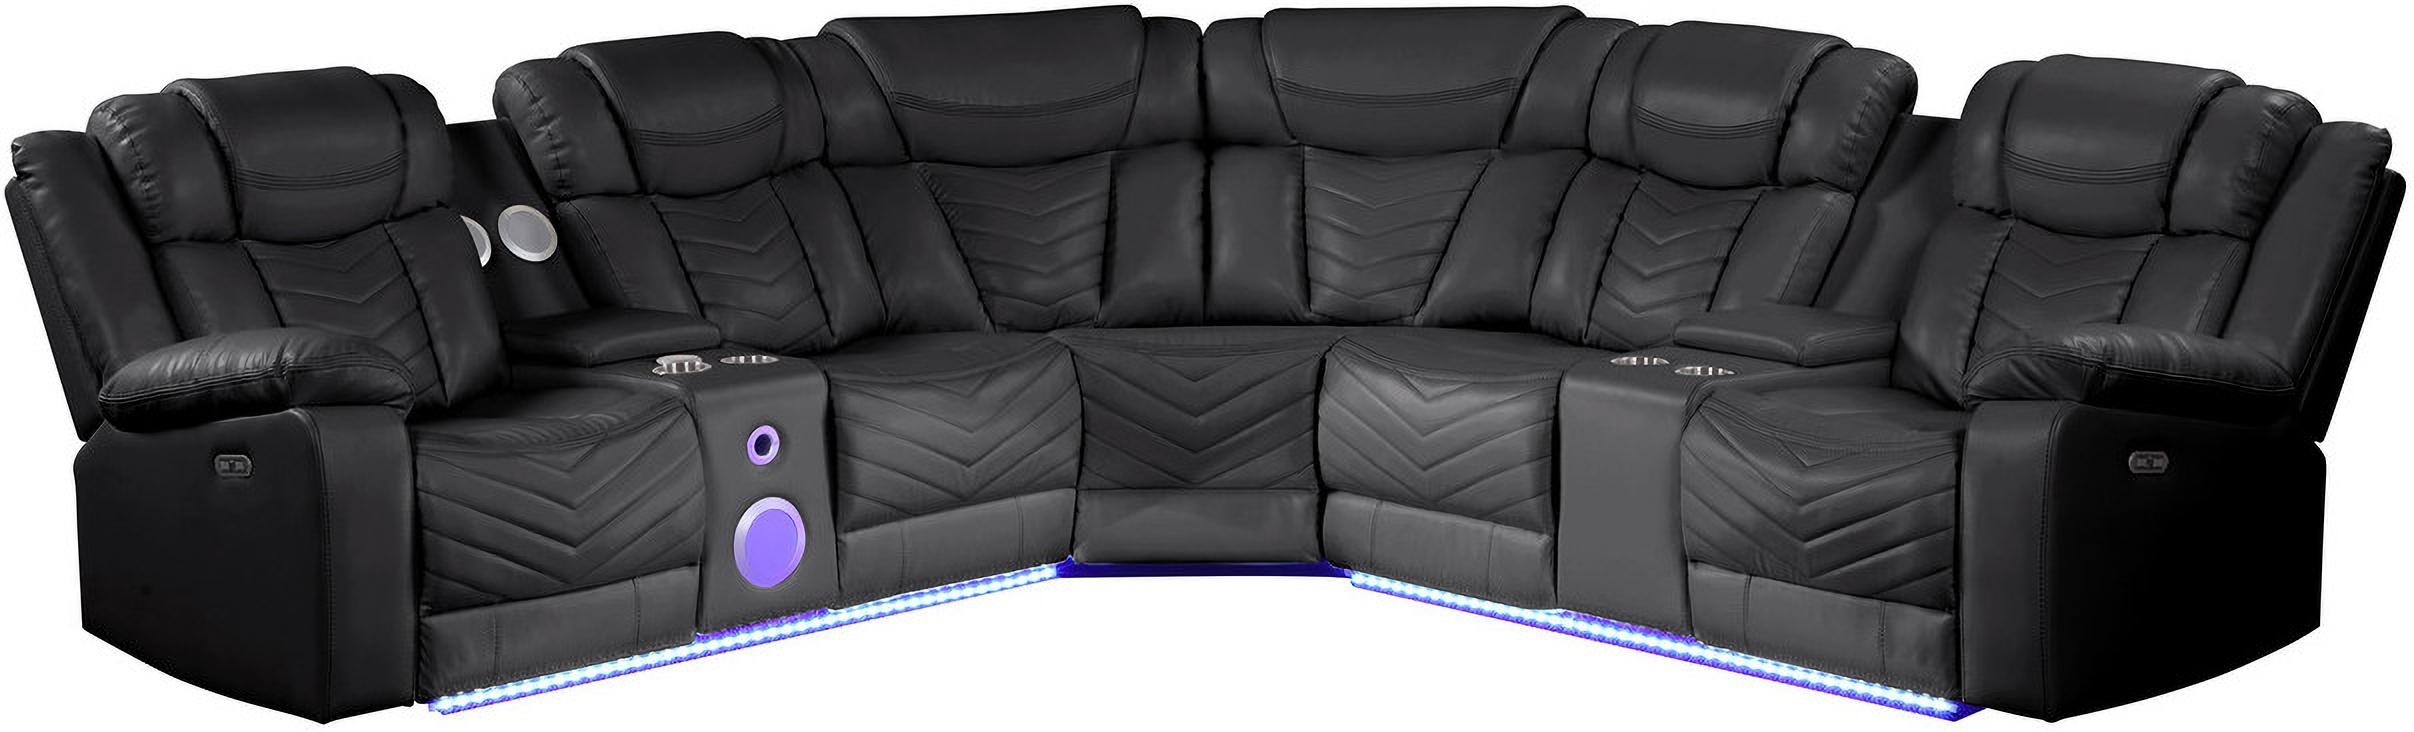 Contemporary, Modern Recliner Sectional Challenger Challenger-BL in Black Faux Leather